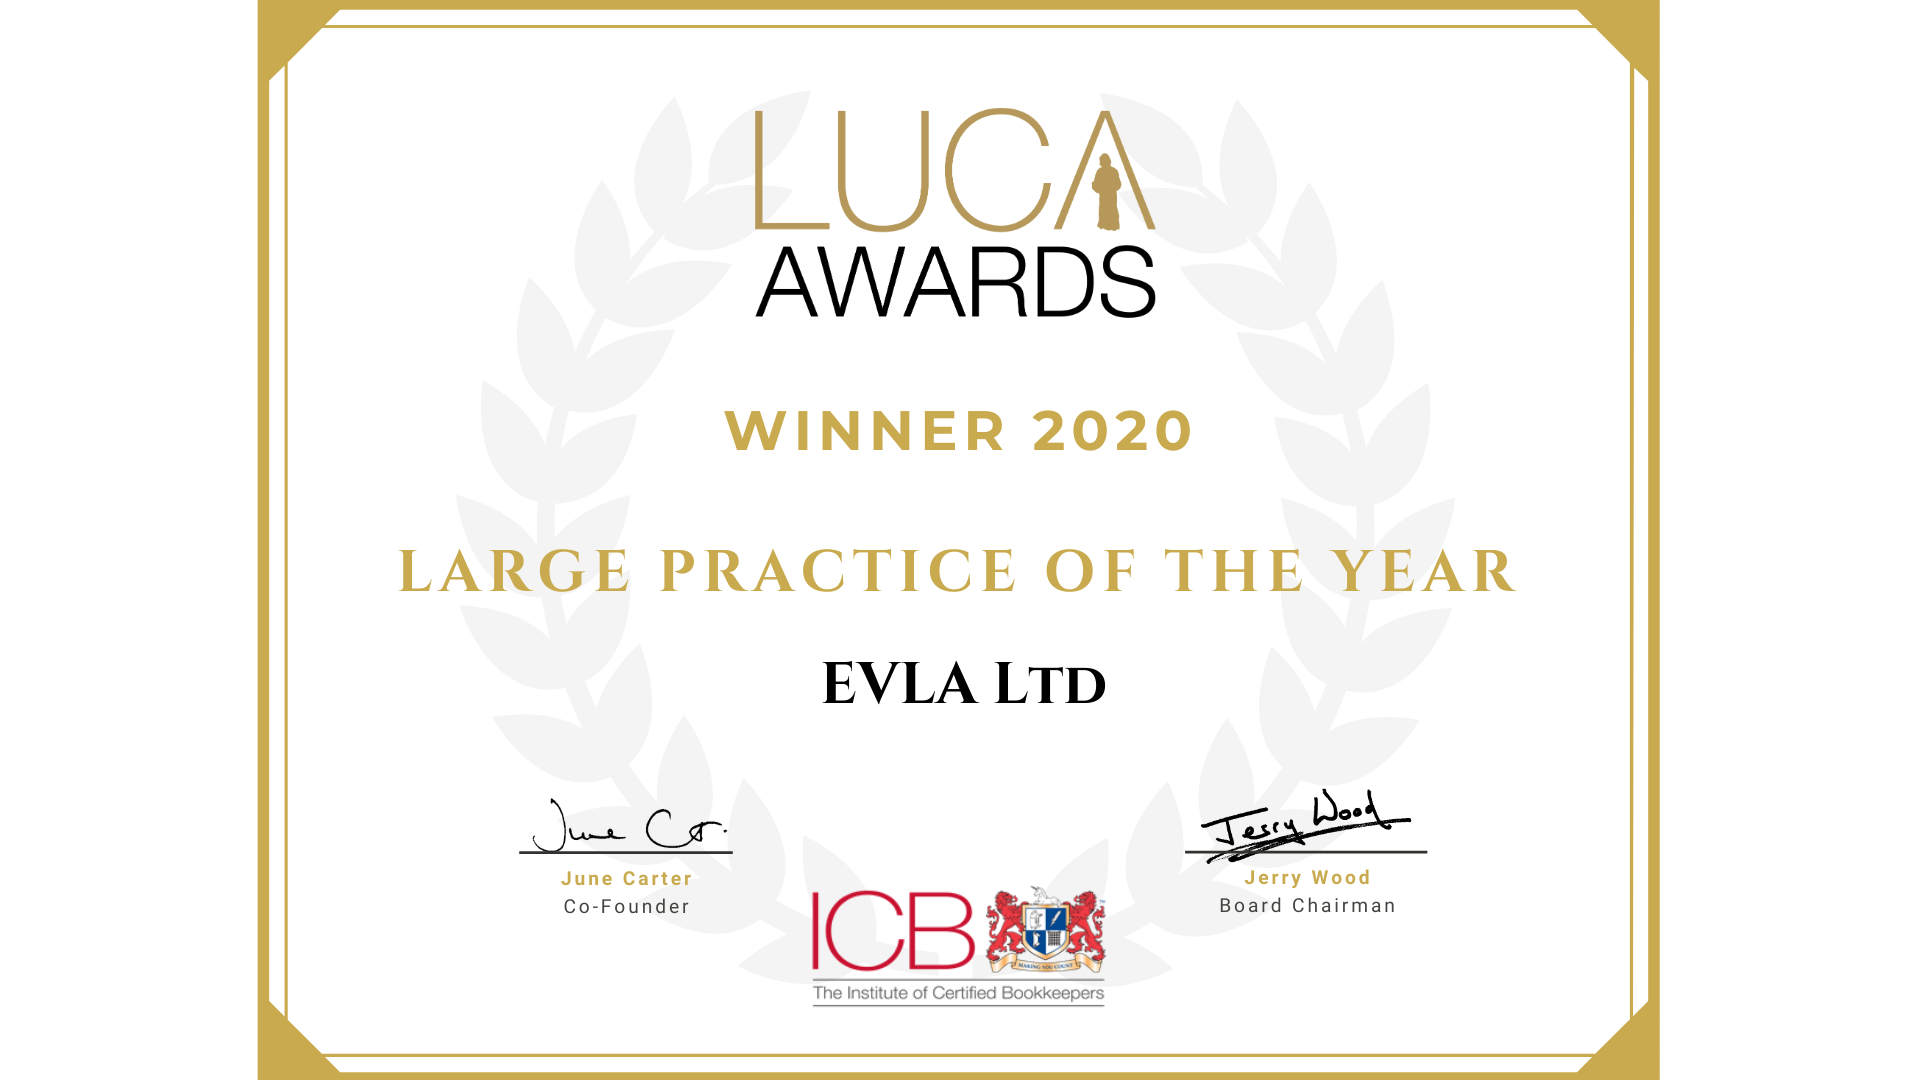 Large practice of the year 2020 certificate